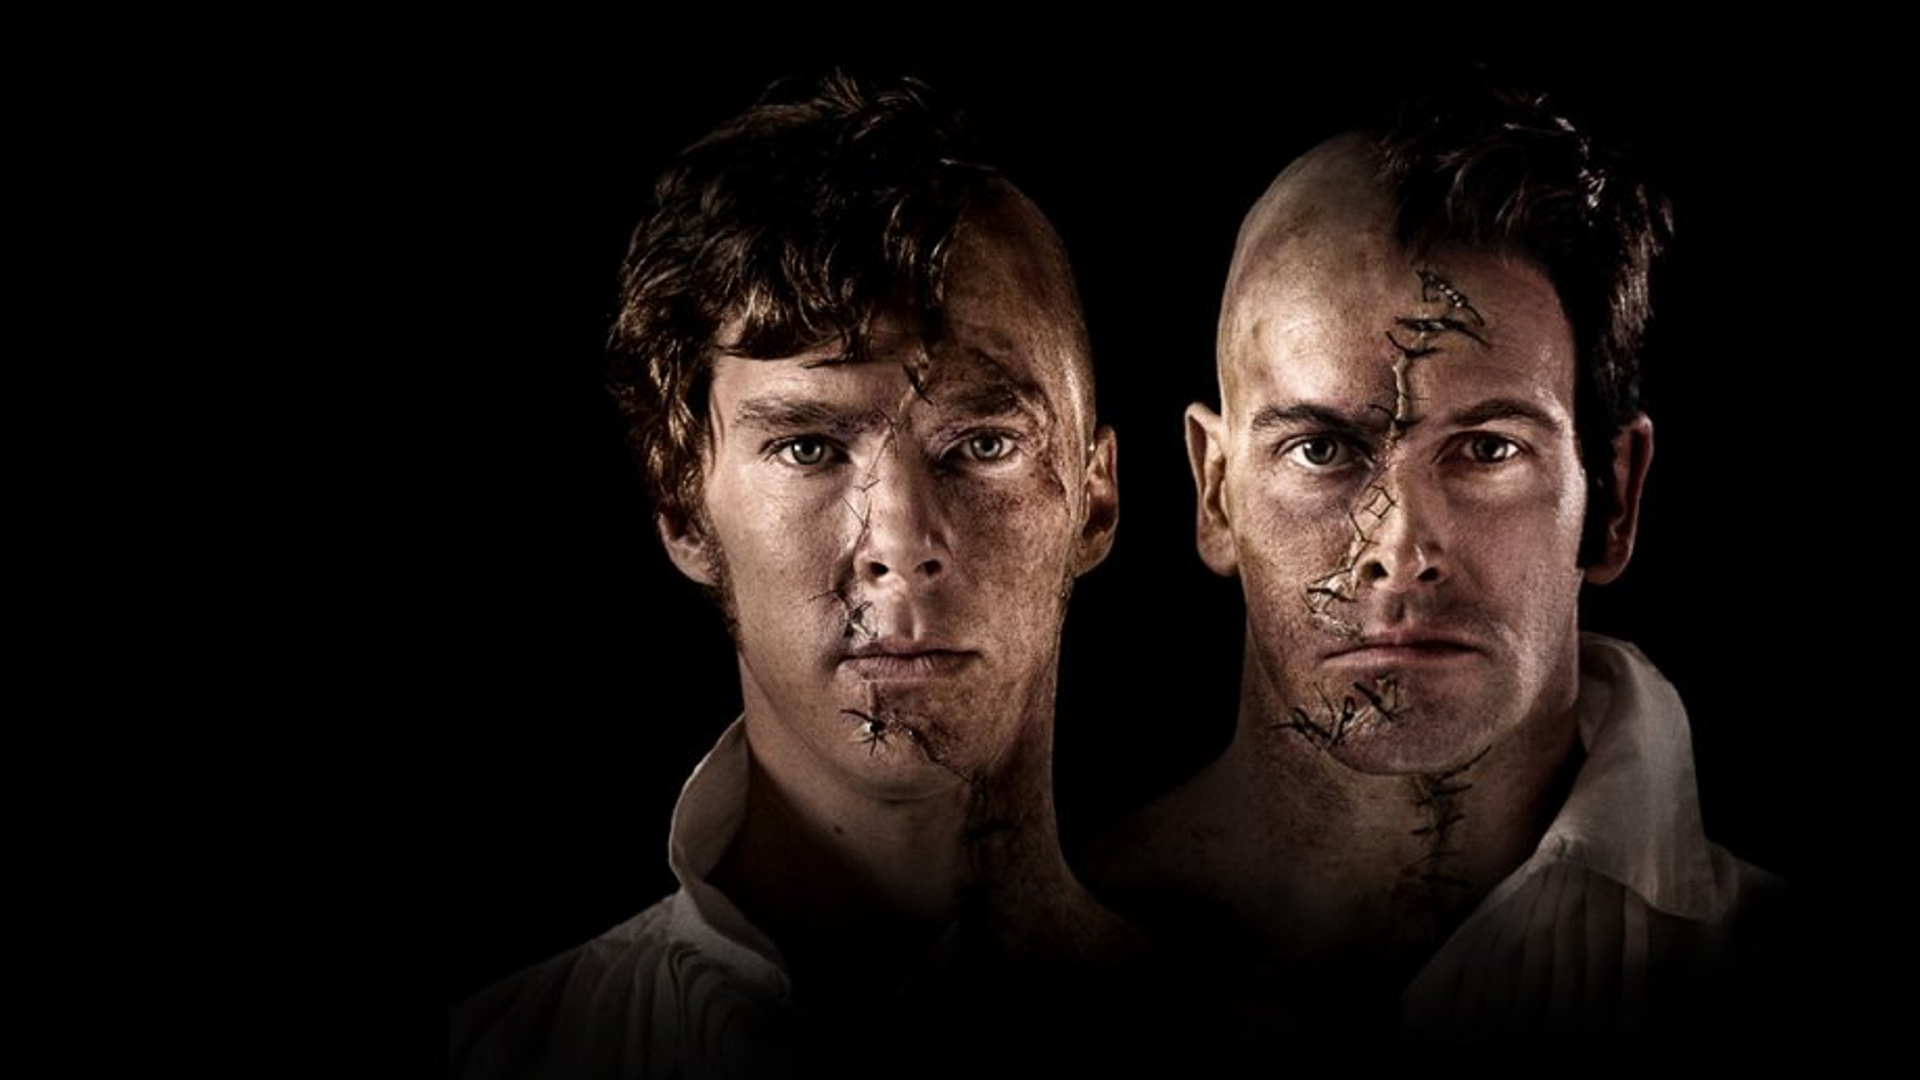 Promotional still from Frankenstein featuring Benedict Cumberbatch and Jonny Lee Miller